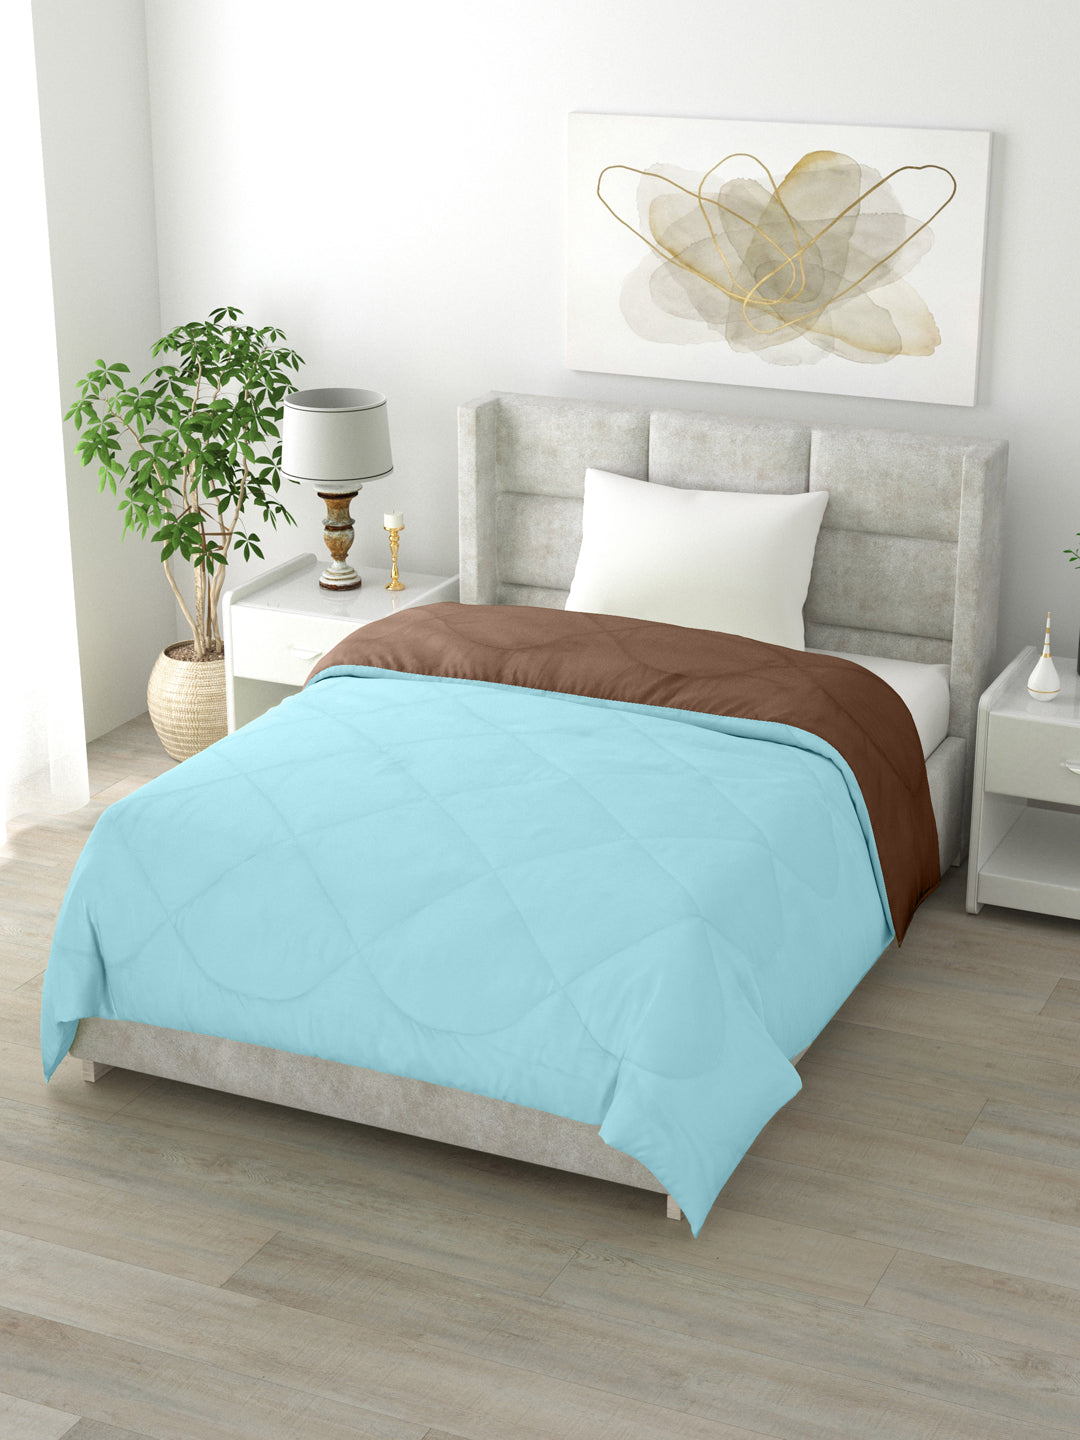 Reversible Single Bed Comforter 200 GSM 60x90 Inches (Brown & Aqua Blue)